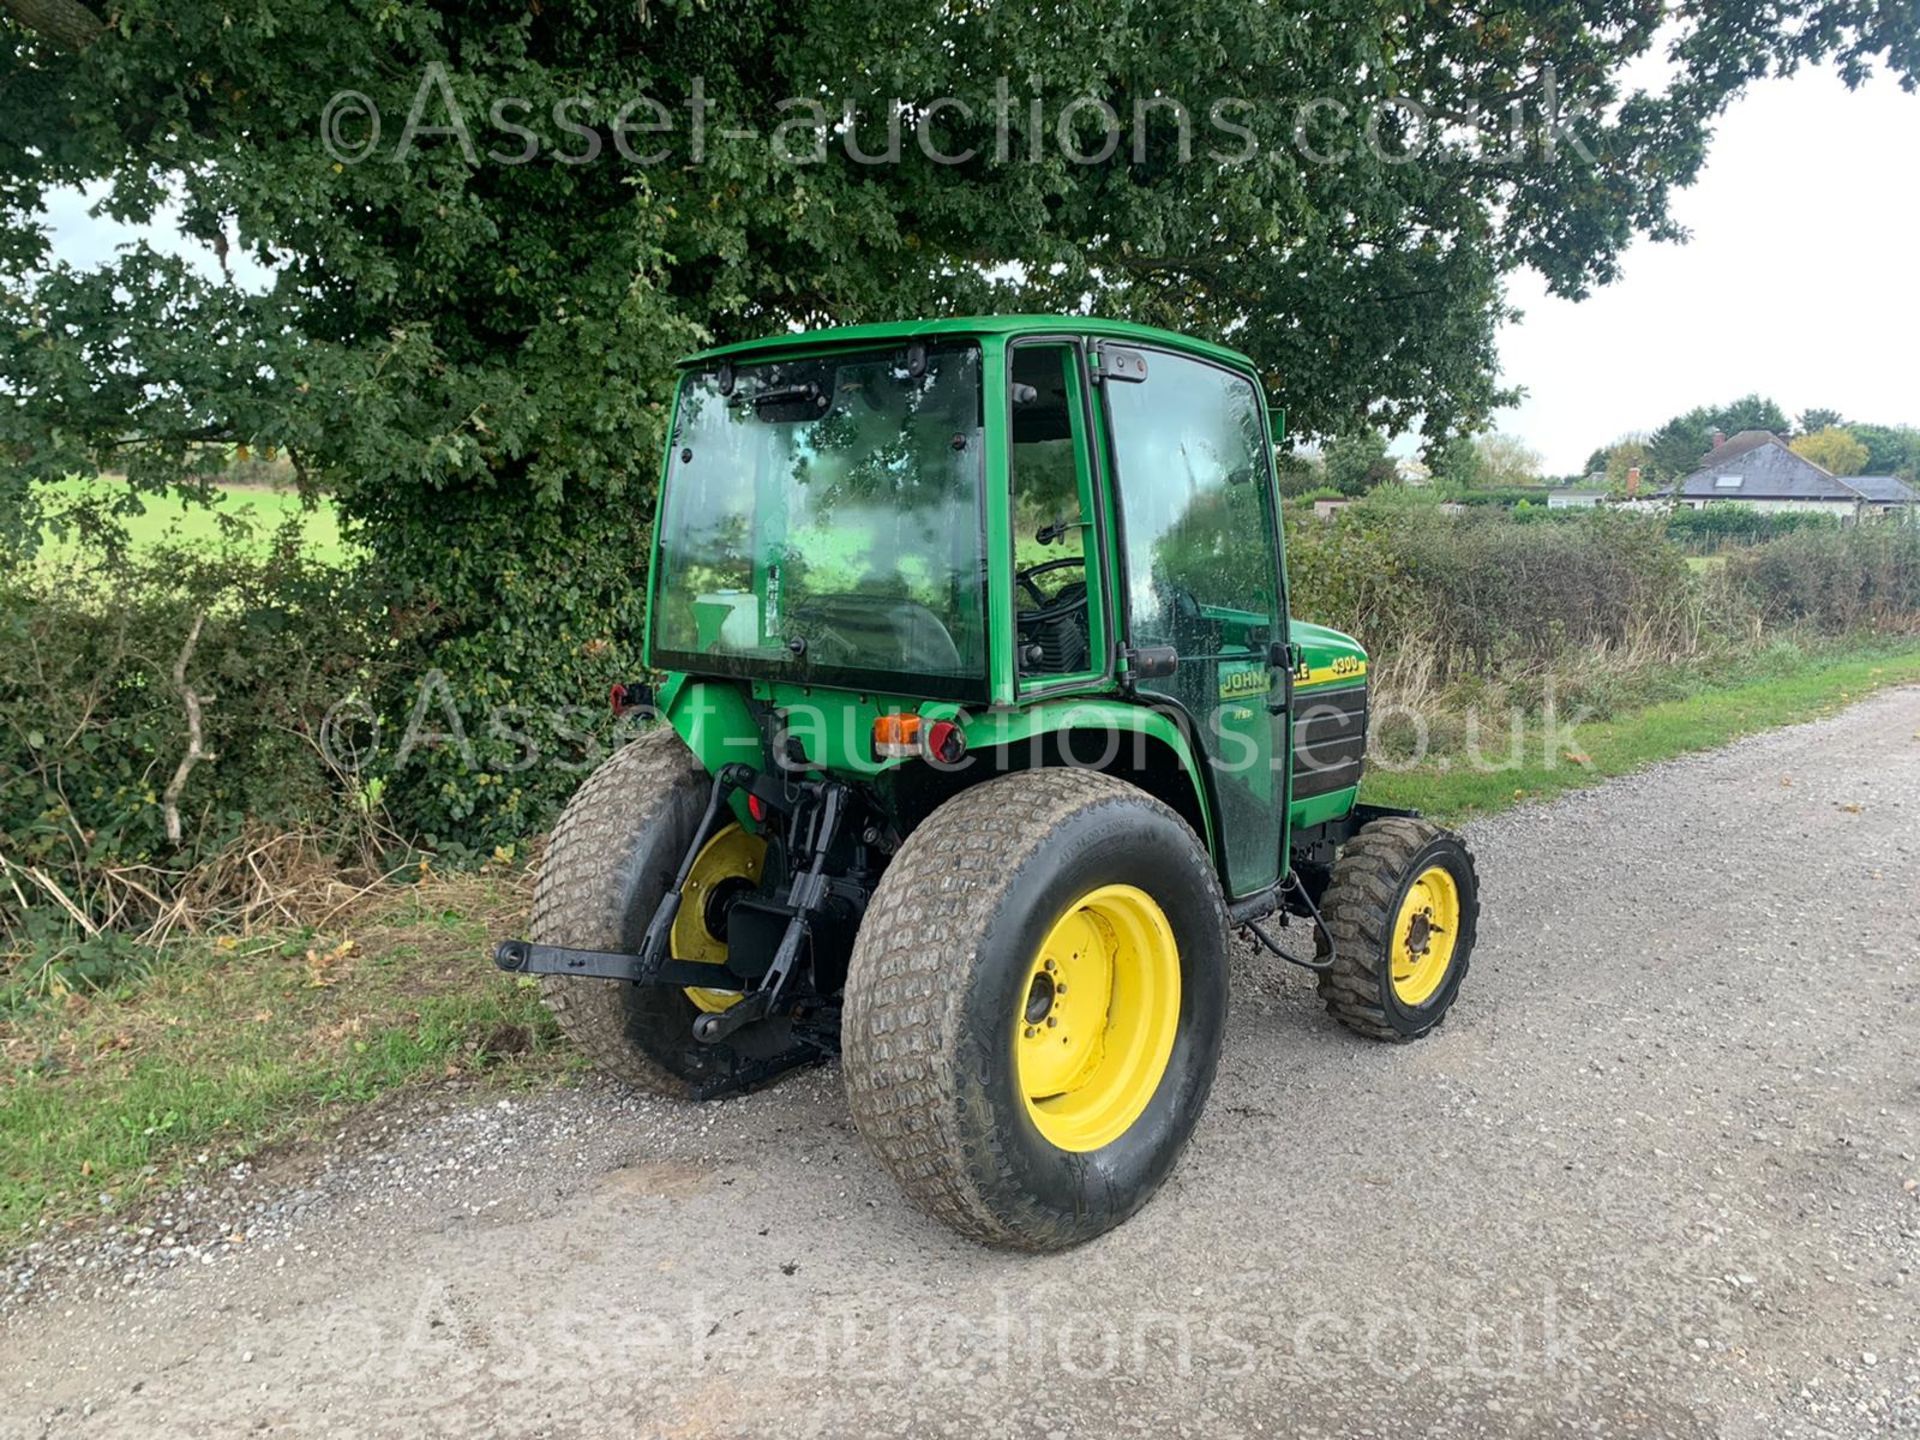 JOHN DEERE 4300 32hp 4WD COMPACT TRACTOR, RUNS DRIVES AND WORKS, CABBED, REAR TOW, ROAD KIT - Image 6 of 9